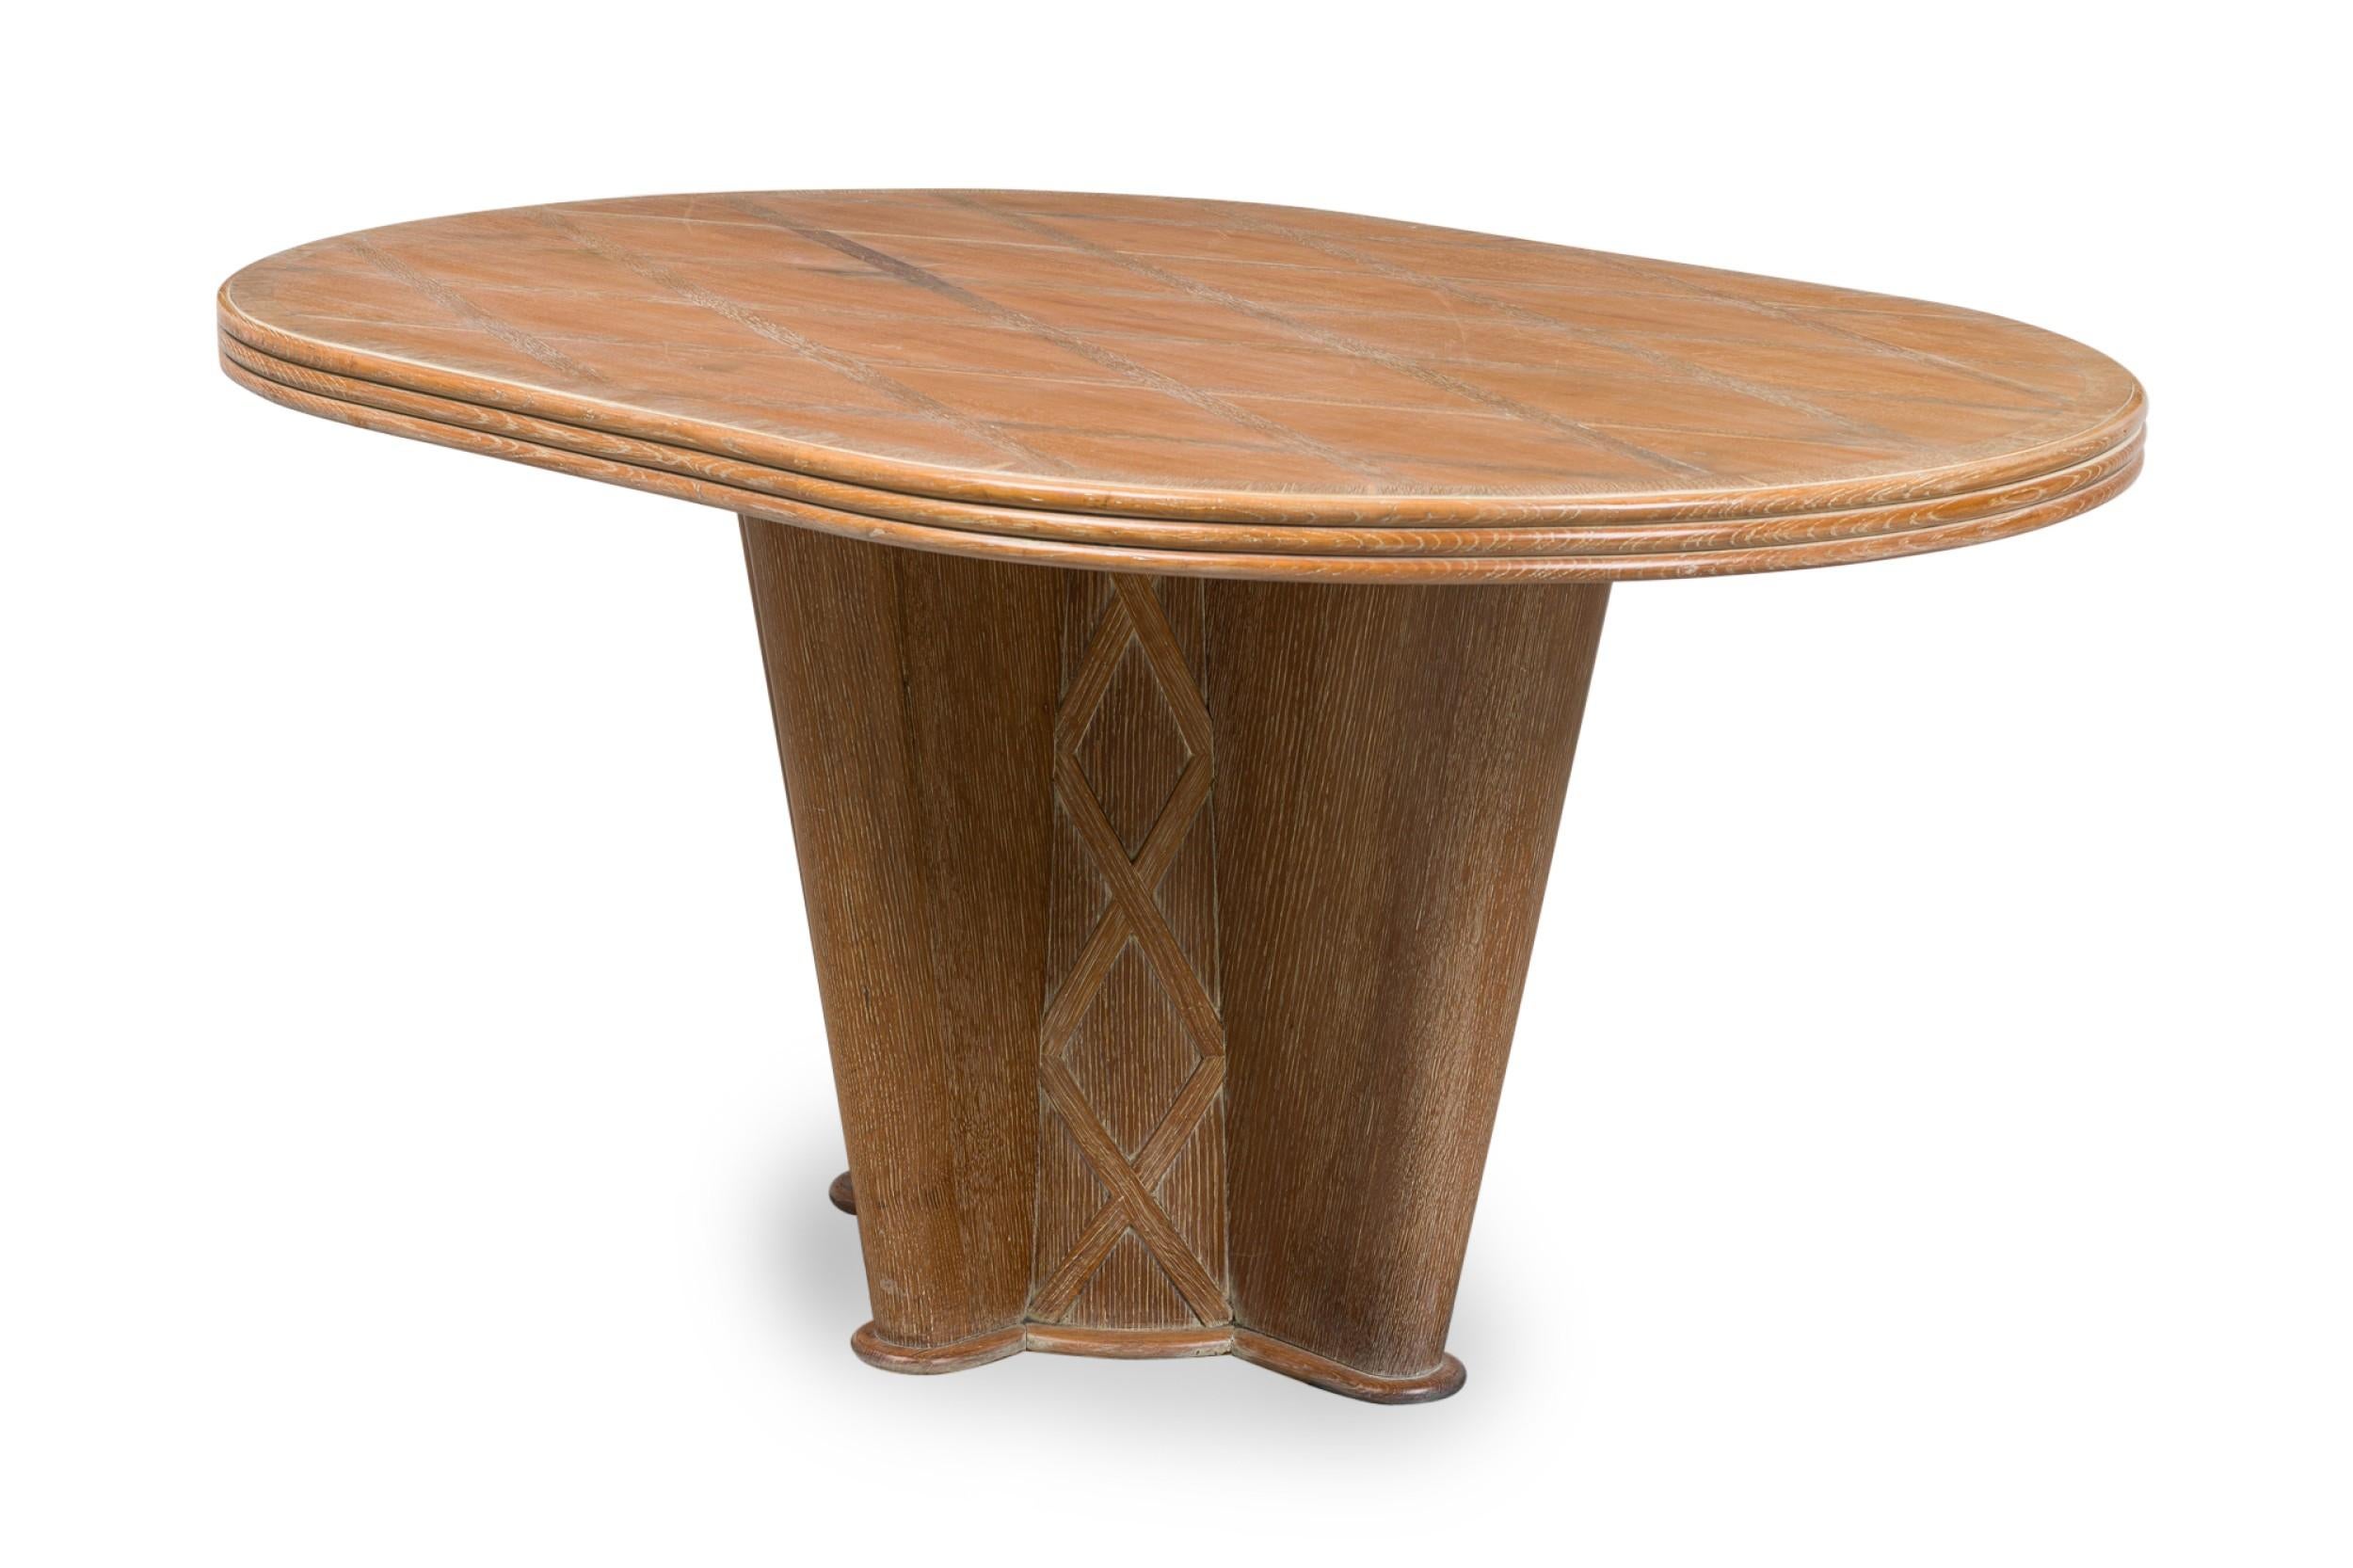 Soubrier Mid-Century French Limed Oak Inlaid Dining Table In Good Condition For Sale In New York, NY